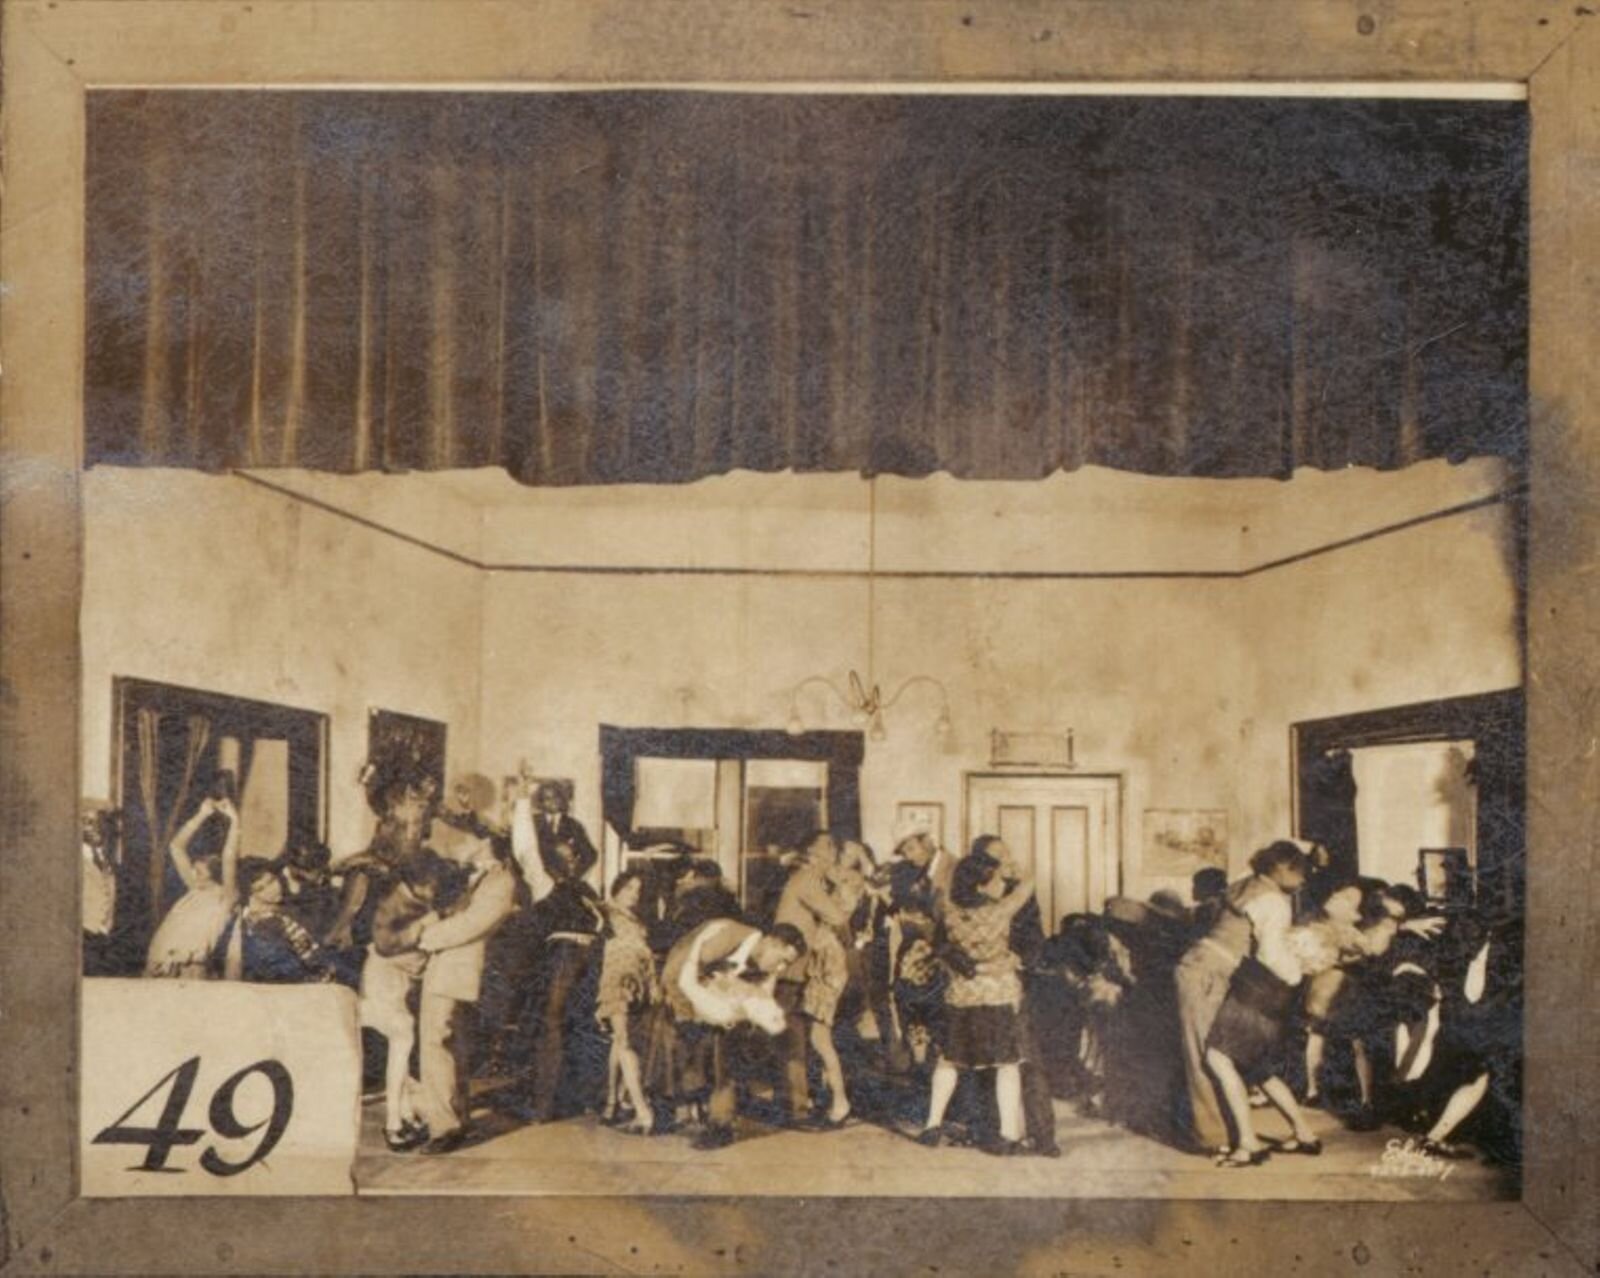 A sepia-colored photo shows a group of actors dancing in a party scene on a stage.